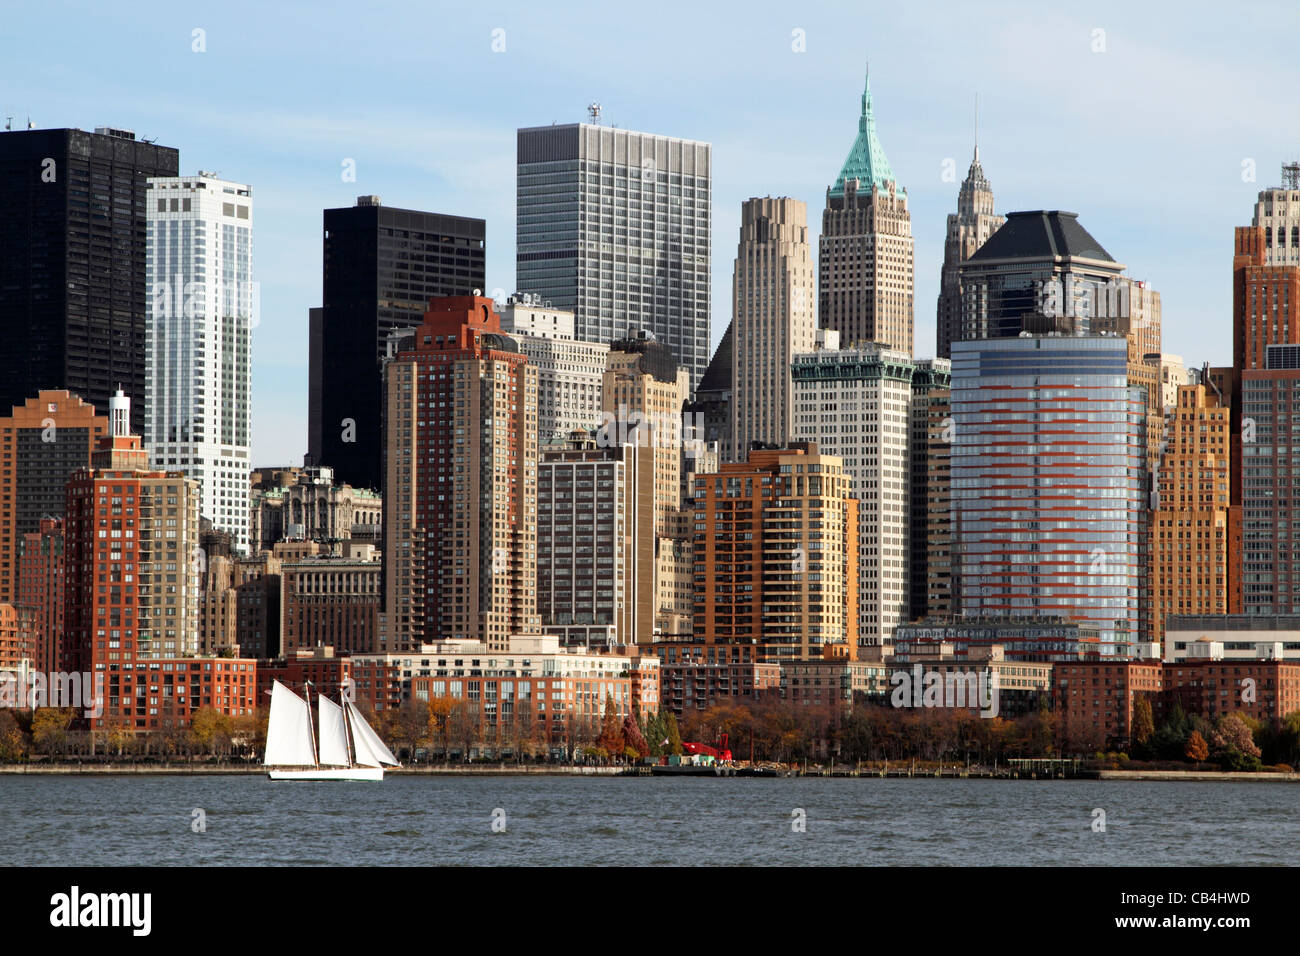 Lower Manhattan, New York City, USA, as viewed from Liberty State Park, New Jersey. Stock Photo